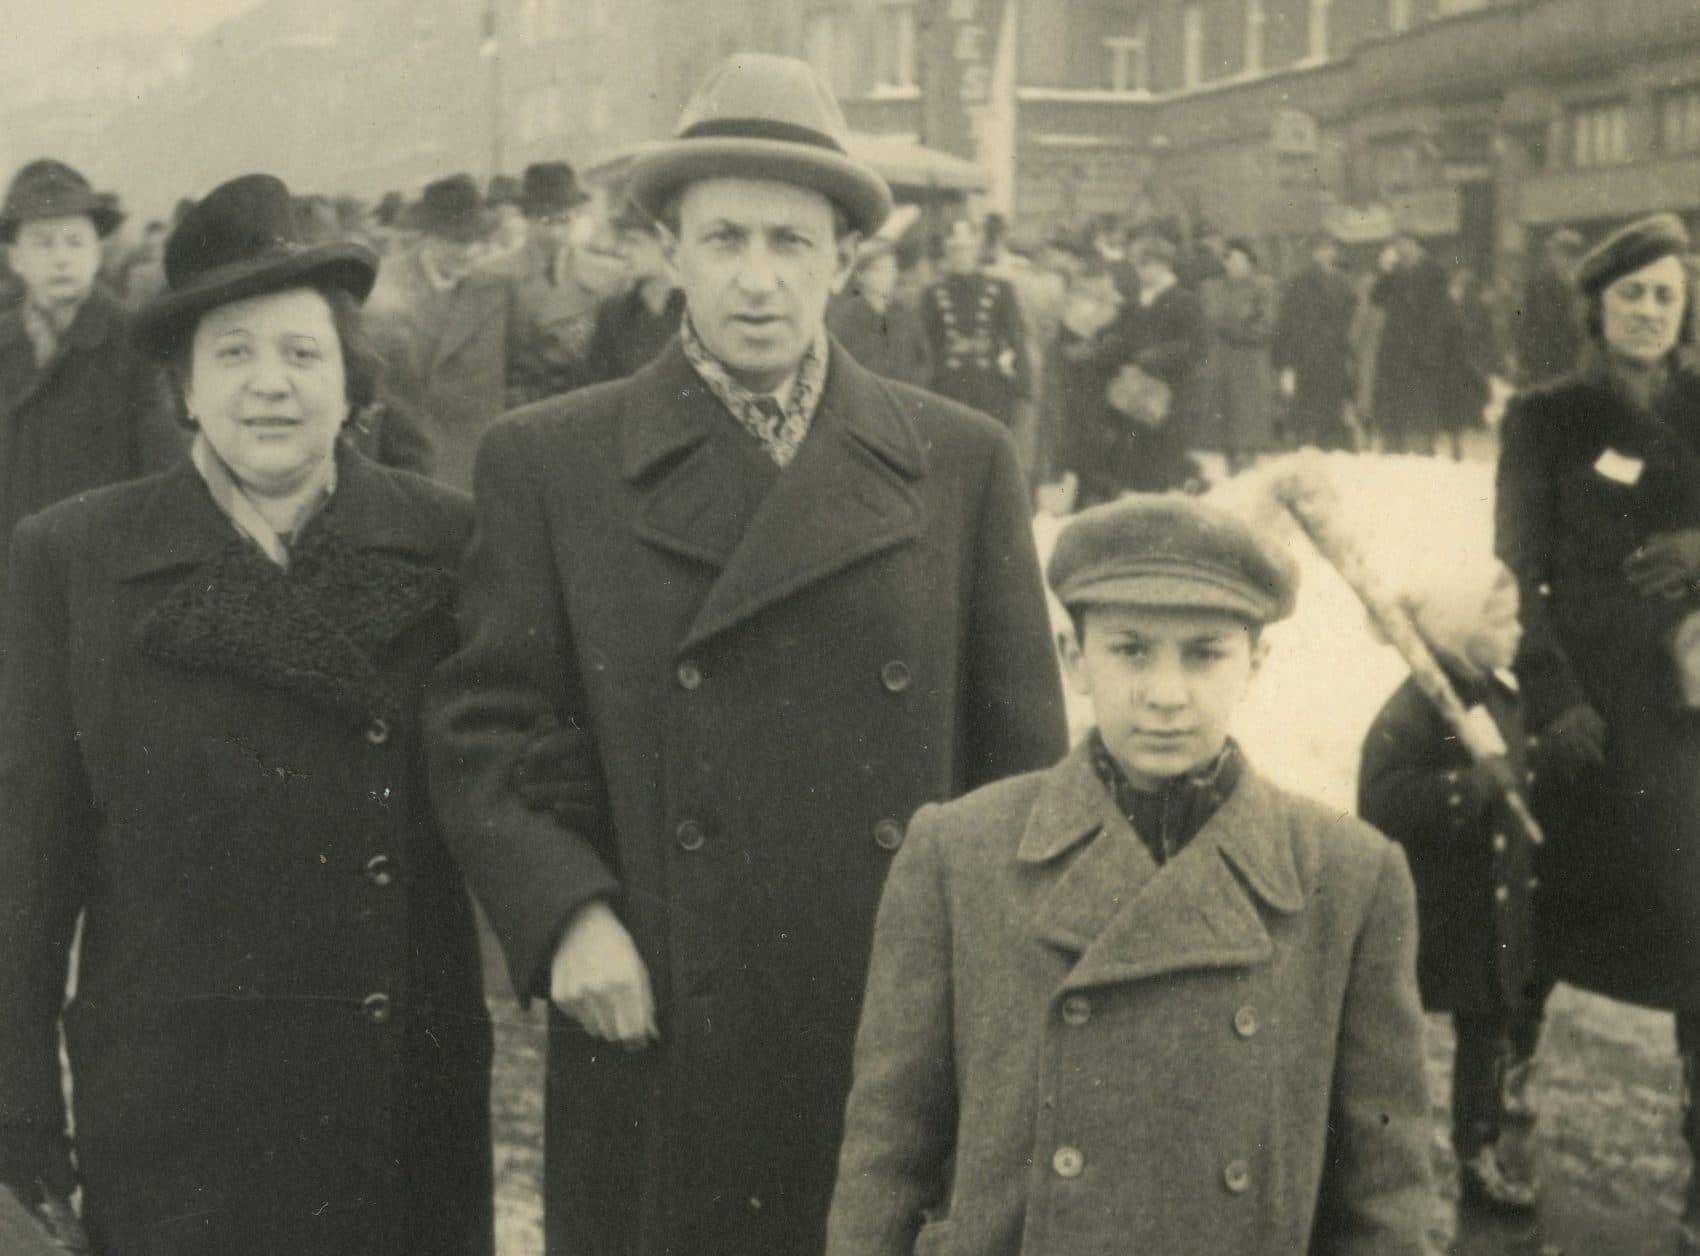 Hana's parents and her younger brother, Petr, in 1941, the year before all three of them would be deported to a concentration camp. None of them survived the war. (Courtesy of Rachael Cerrotti)